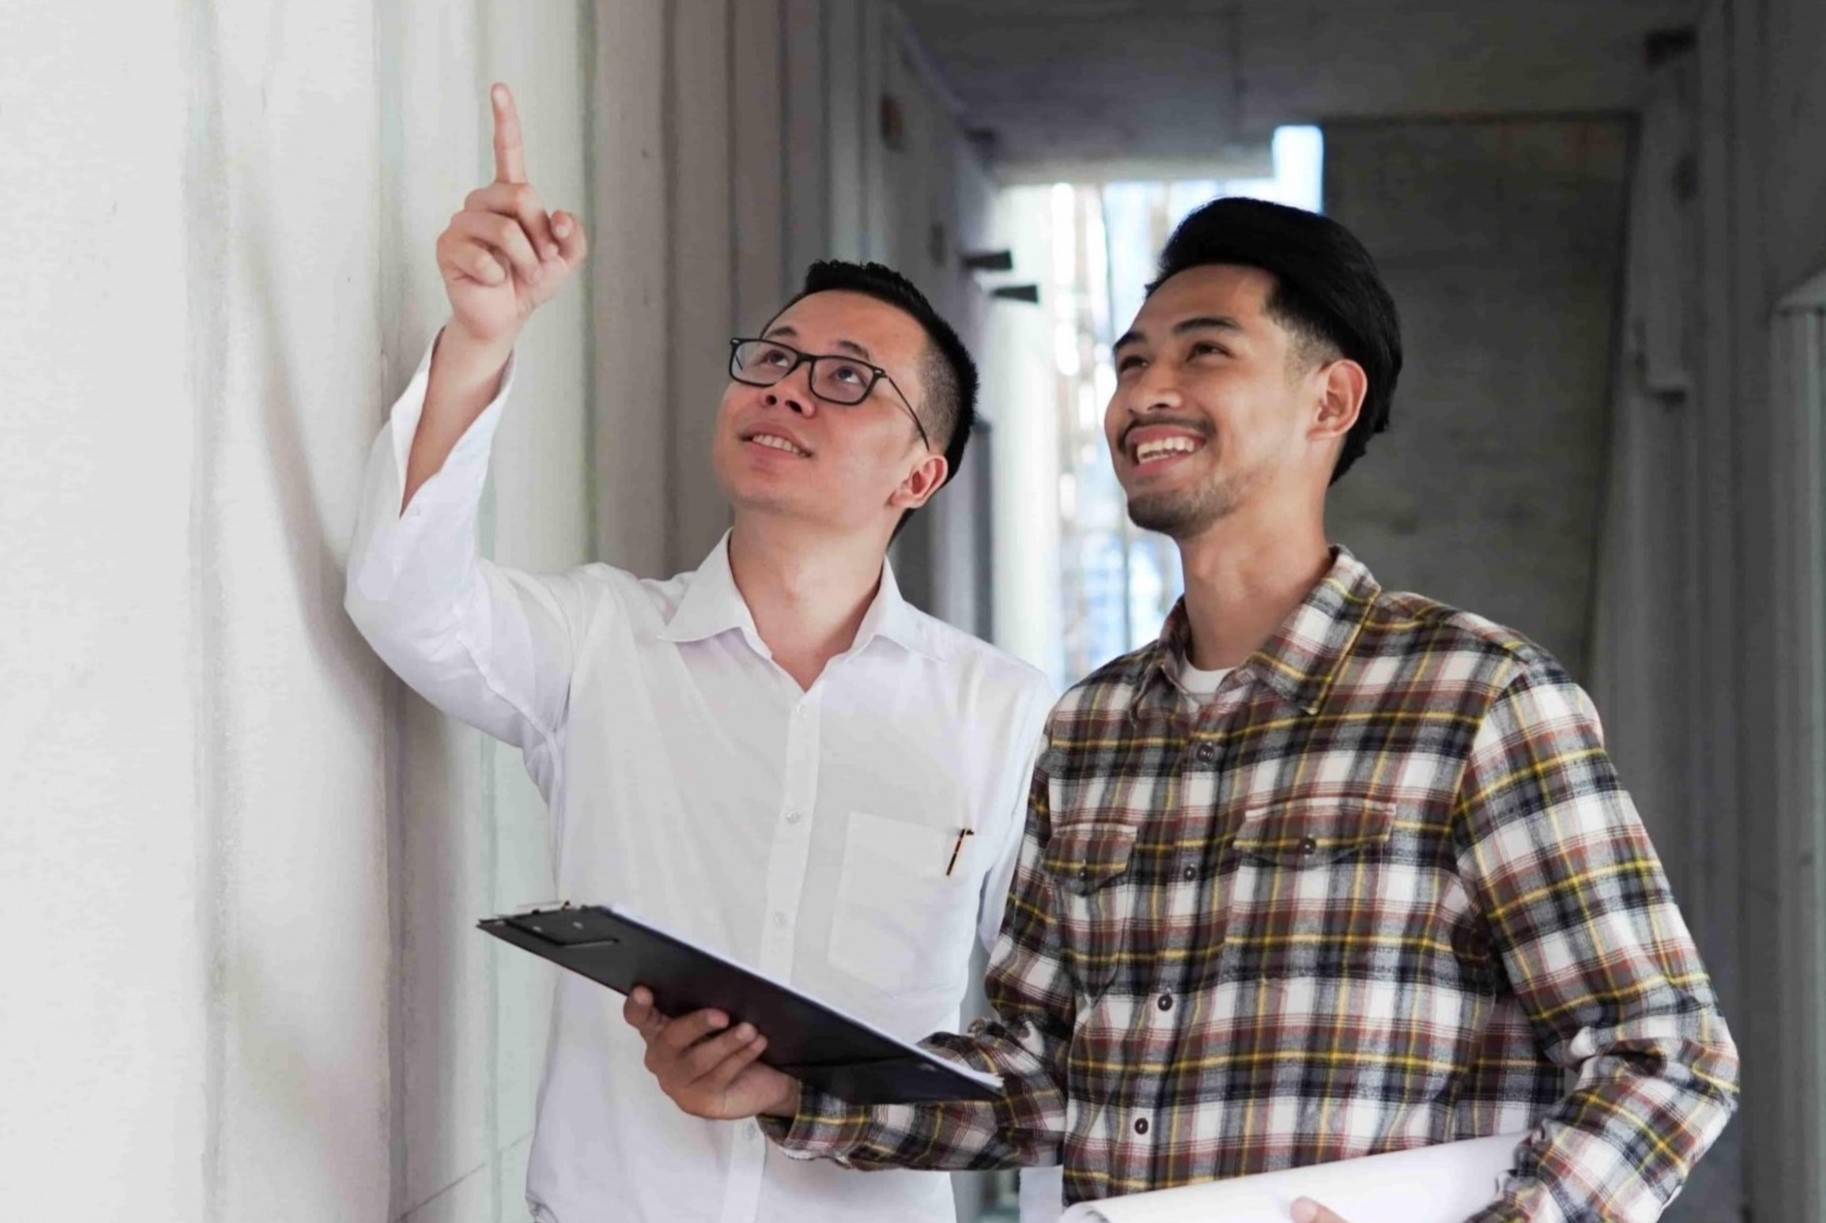 What To Look For In A Home Inspection